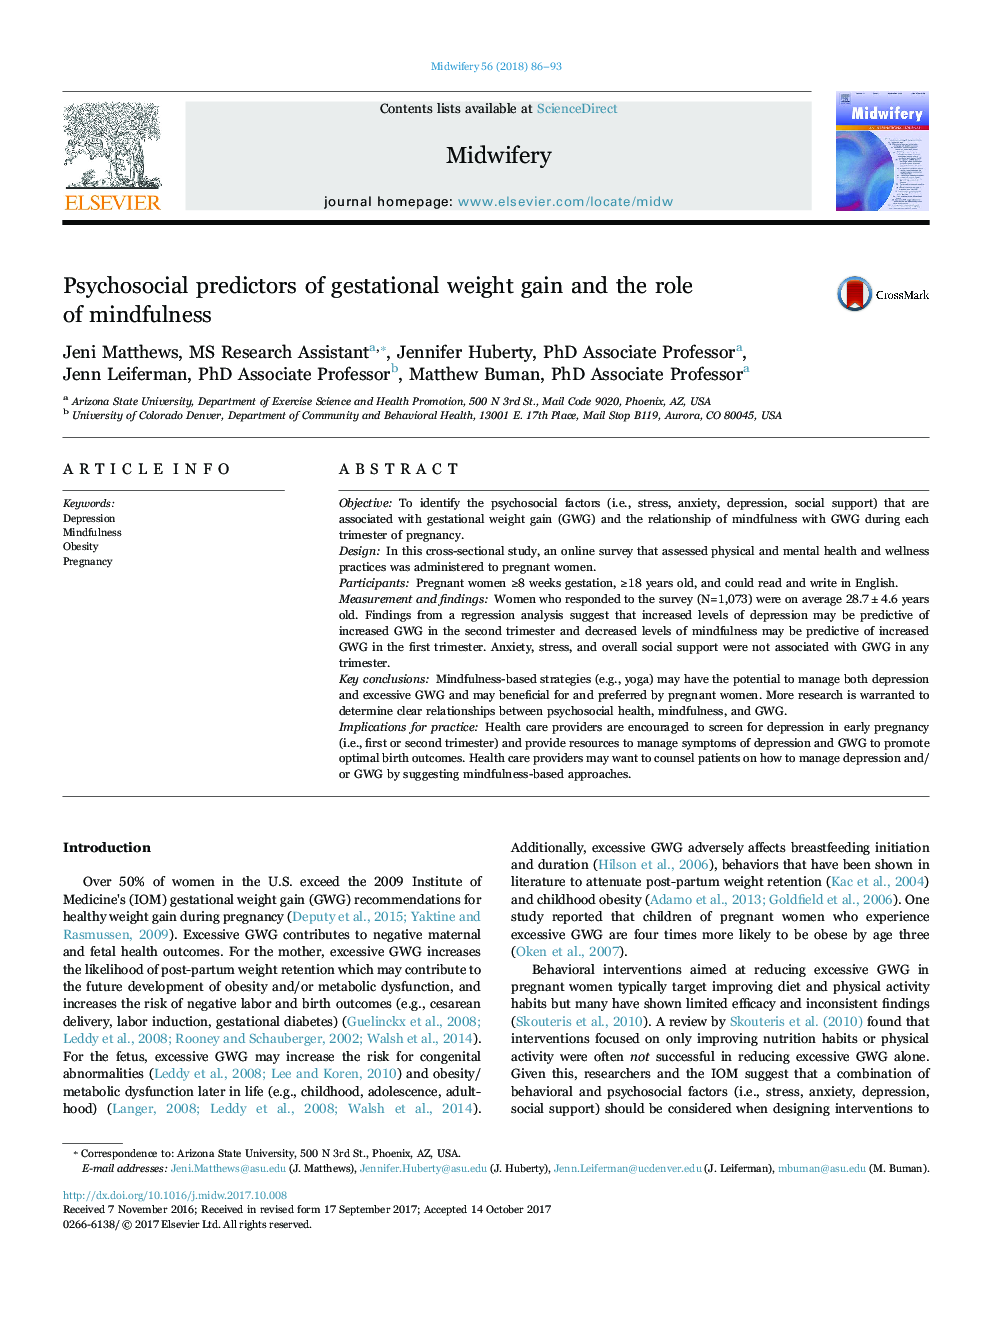 Psychosocial predictors of gestational weight gain and the role of mindfulness